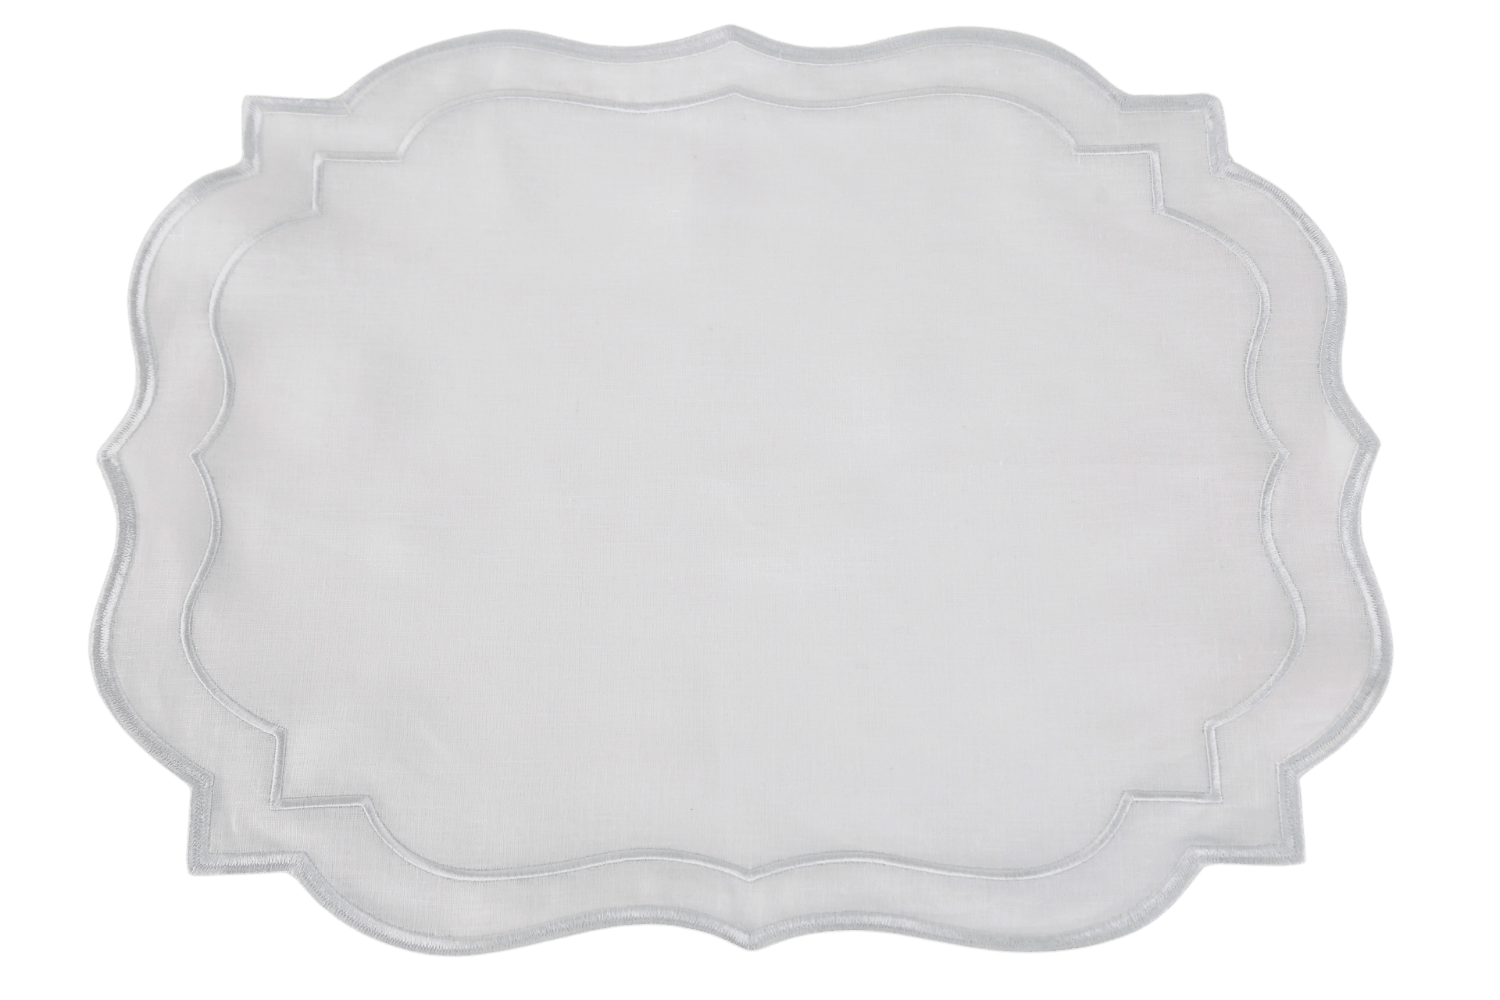 Scalloped linen placemats, set of 4, add elegance to your table setup. Made of premium flax linen, ironing is recommended for a luxurious look. 38 x 38cm.